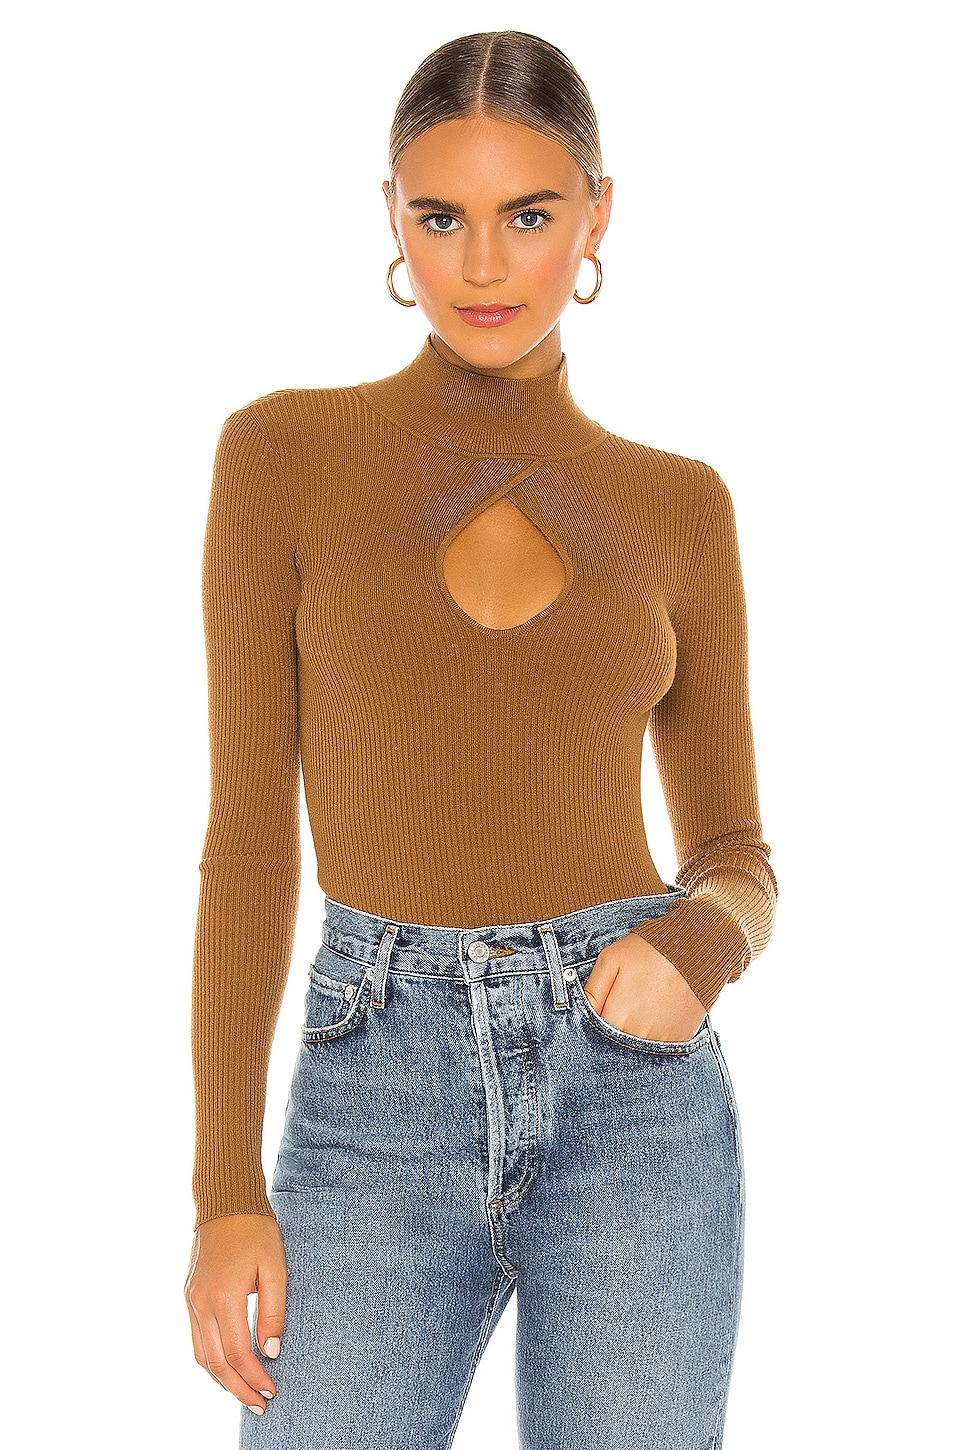 Lovers and Friends Niko Turtleneck in Camel | REVOLVE